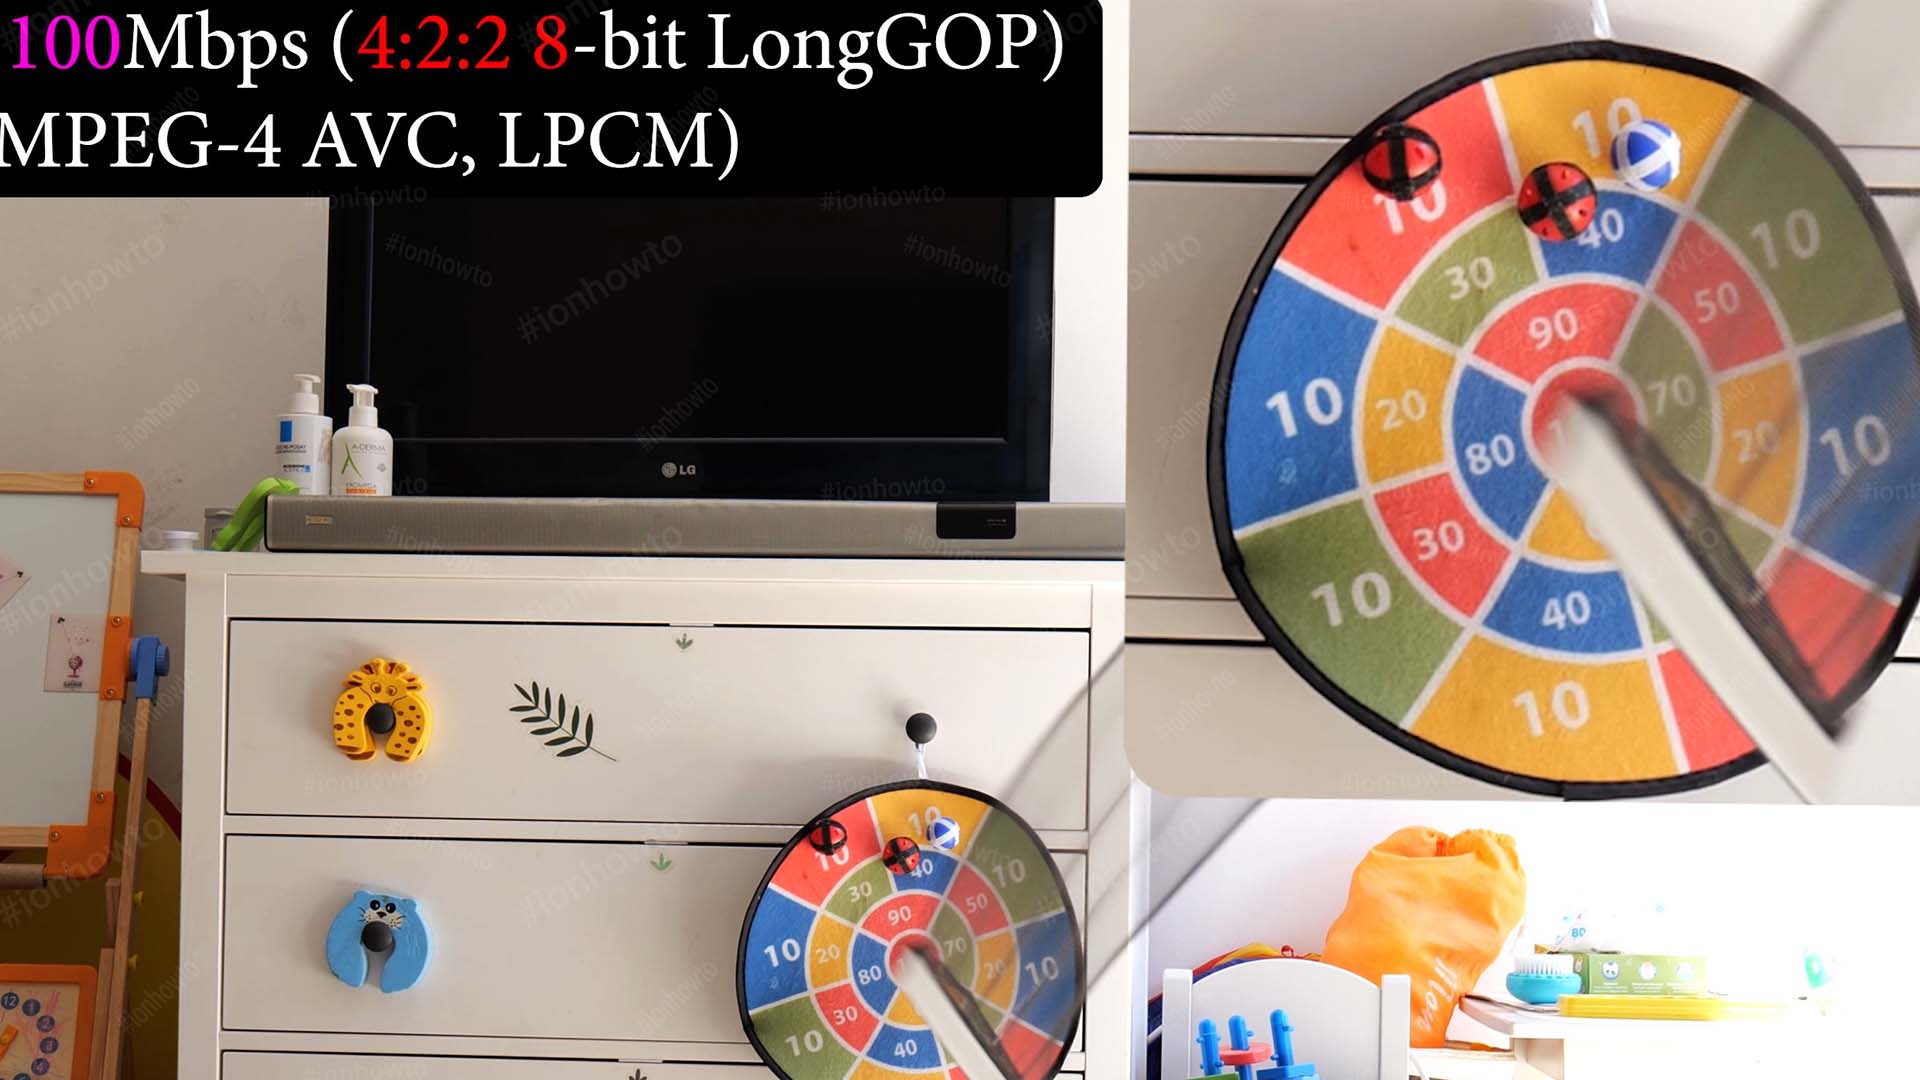 Panasonic Lumix S5 codecs compared  zoomed in